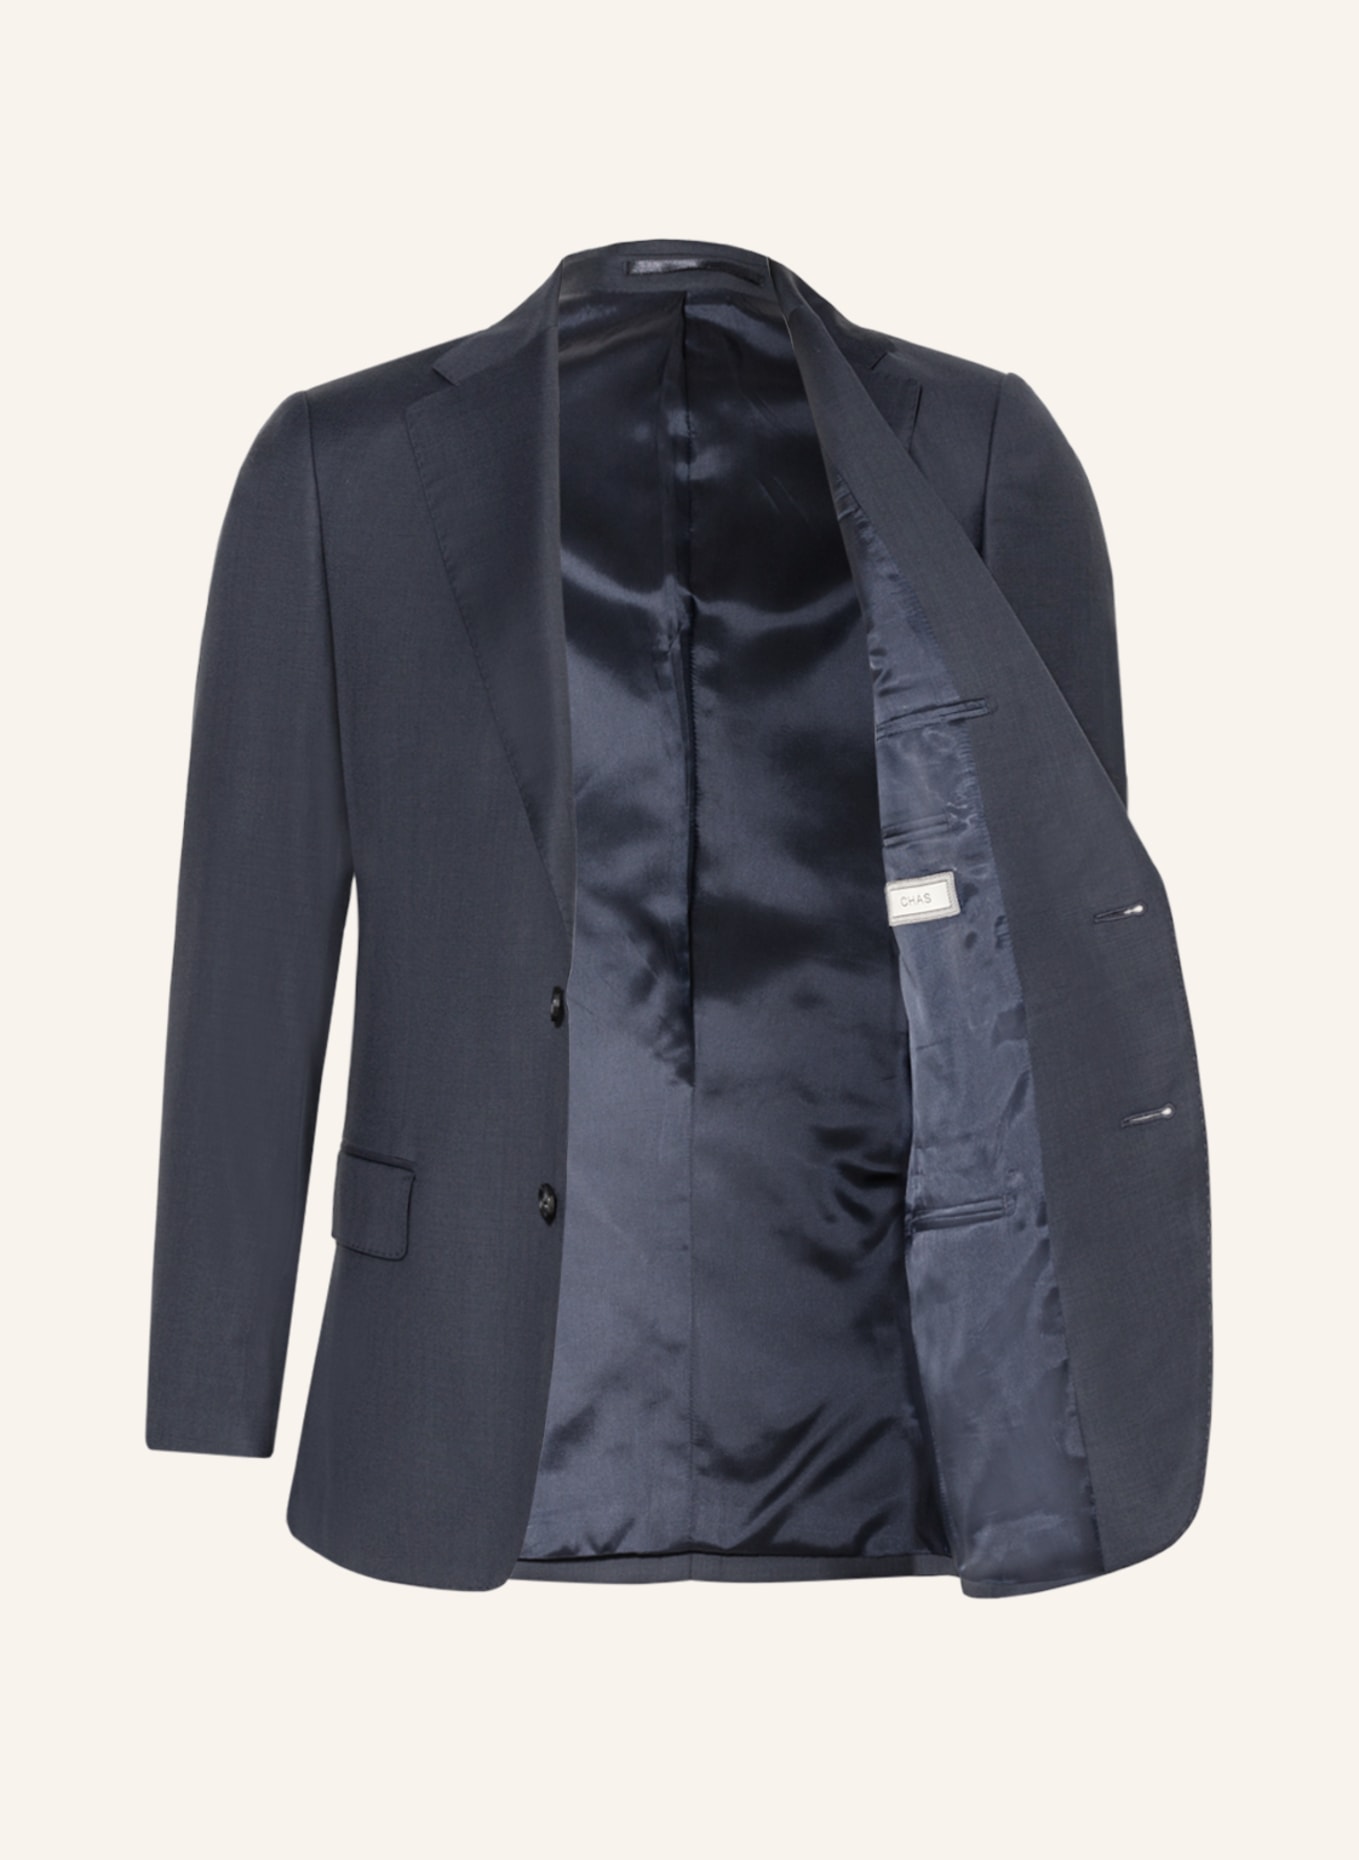 CHAS Suit jacket extra slim fit, Color: 1/176 Navy (Image 4)